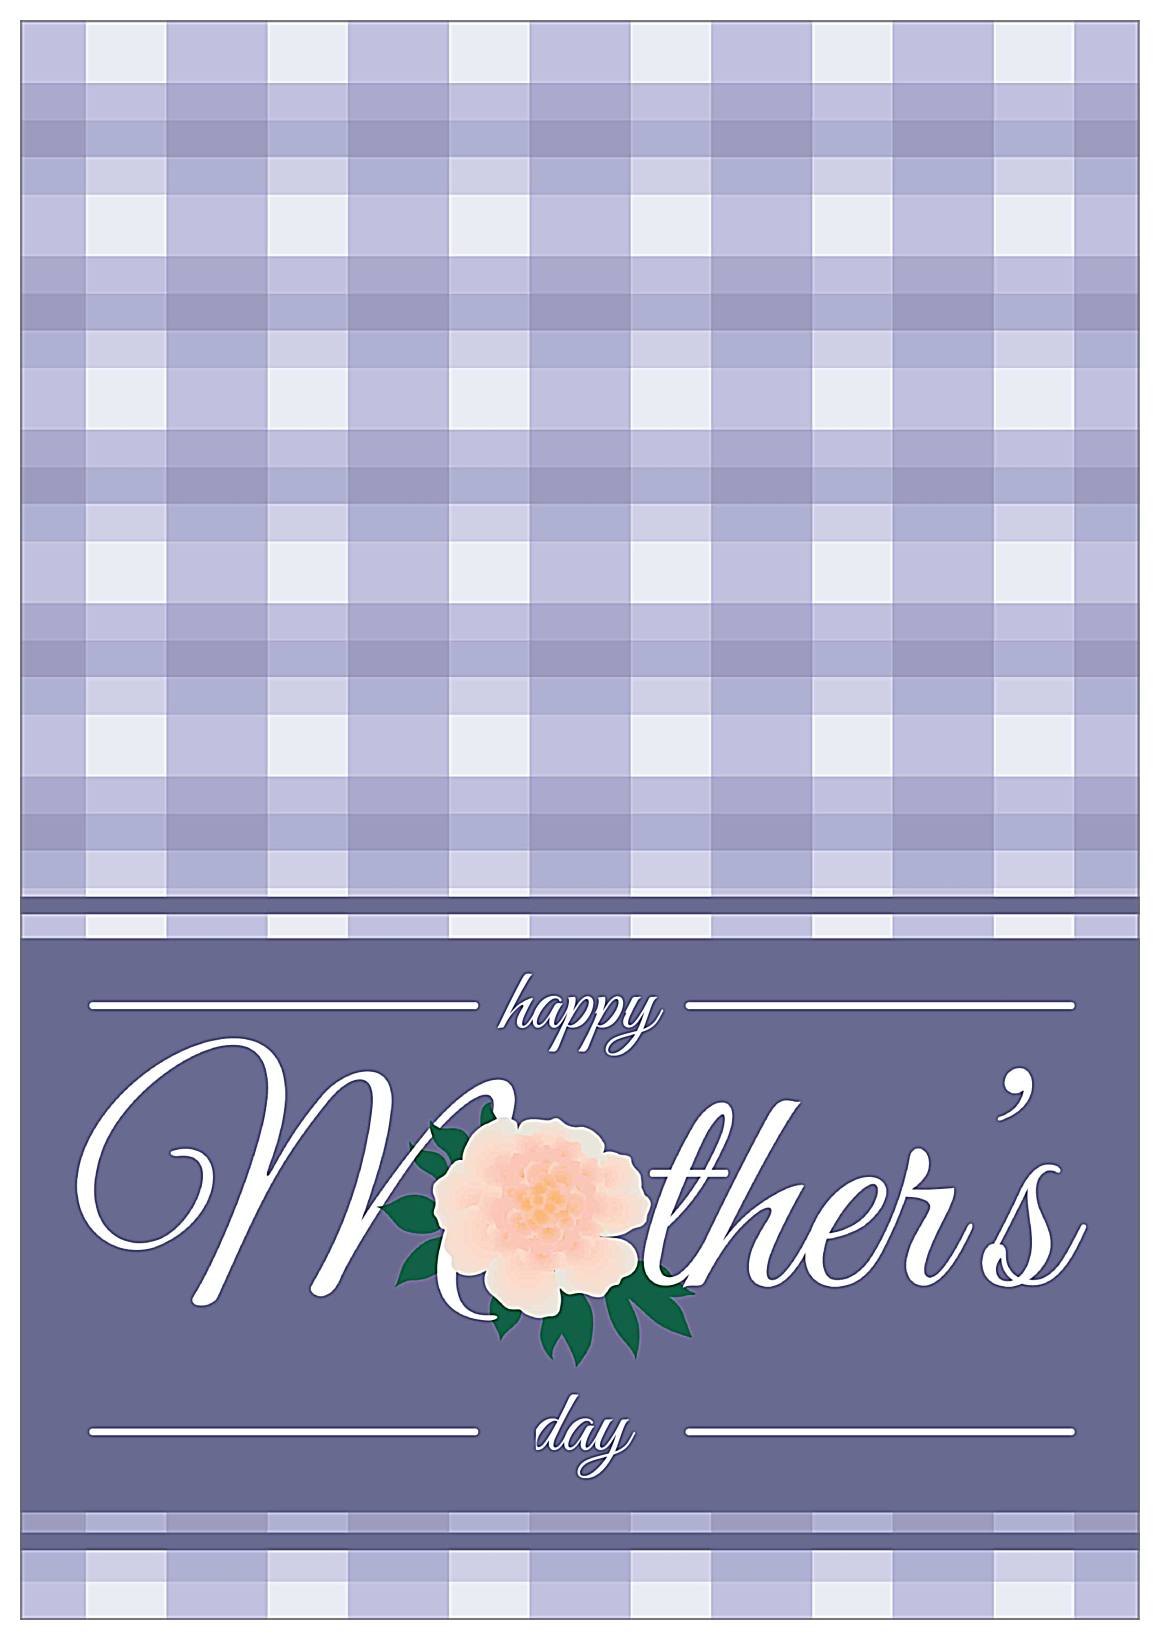 Mamas Peonies front - Greeting Cards Maker